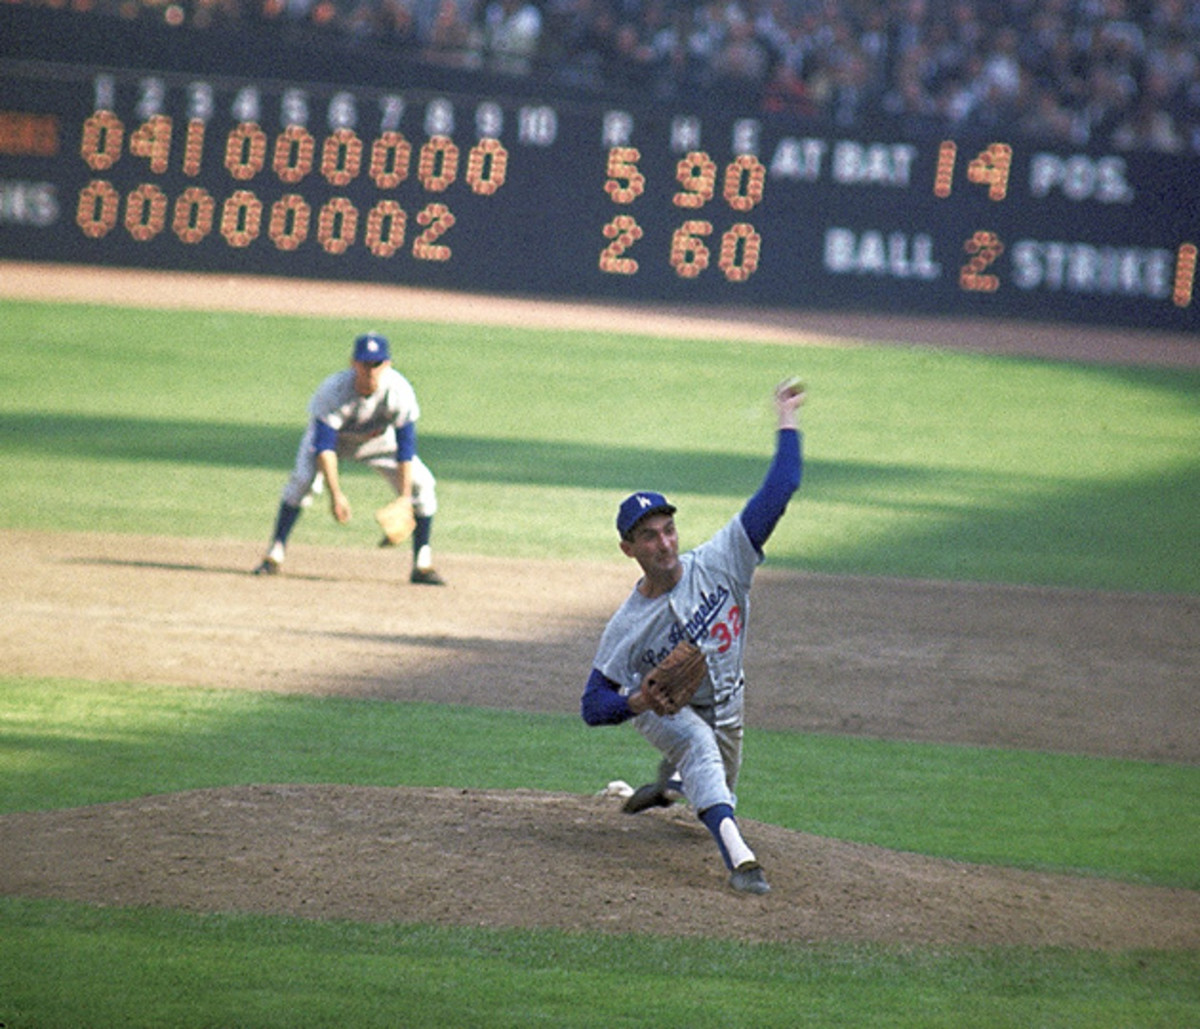 Sandy Koufax won World Series MVP honors in the Dodgers' 1963 victory over the Yankees.